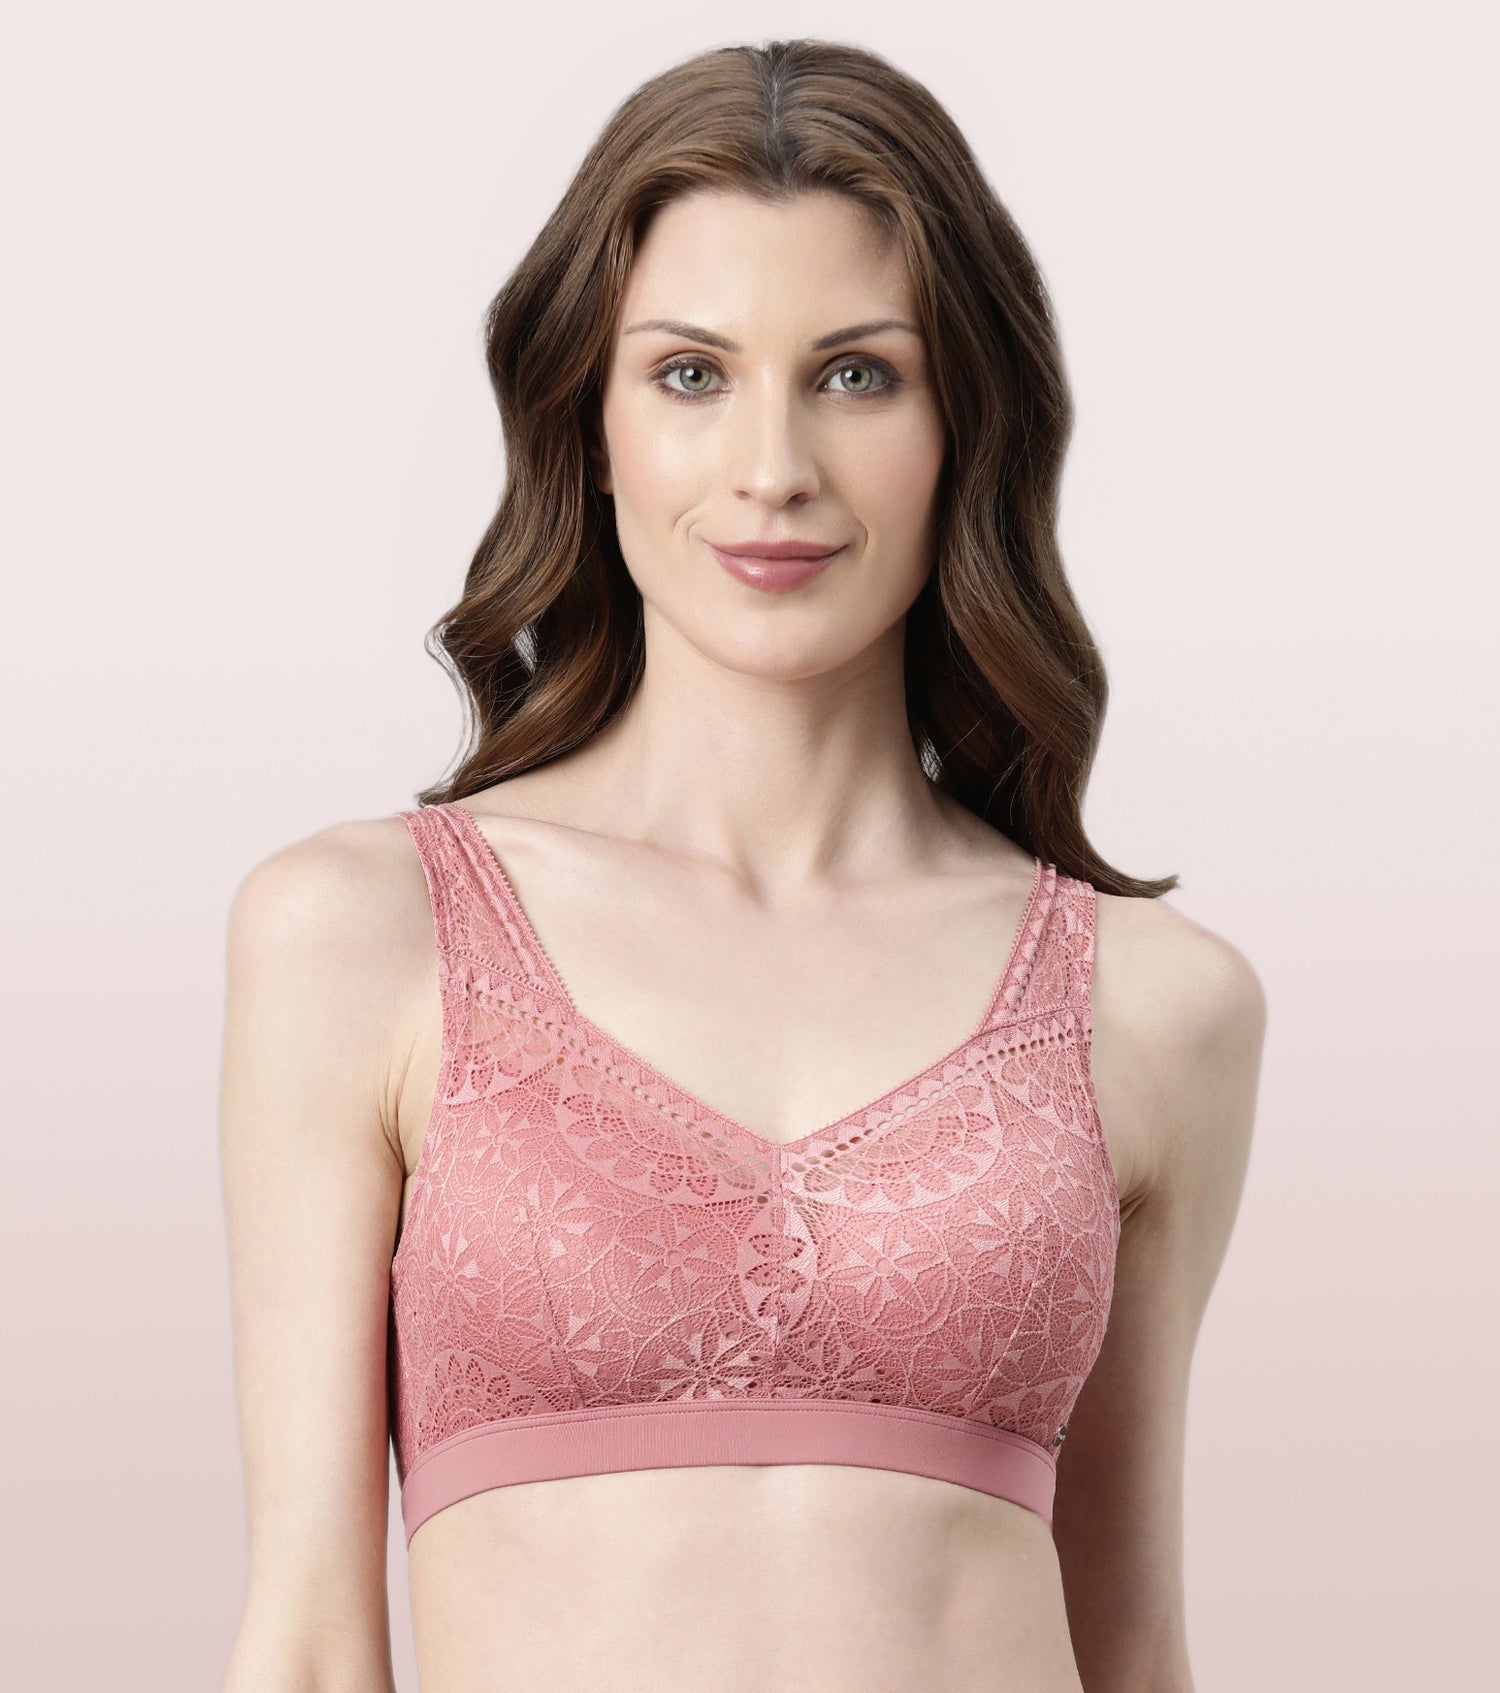 Best Bra Brands In India - Our Top 15 With Images